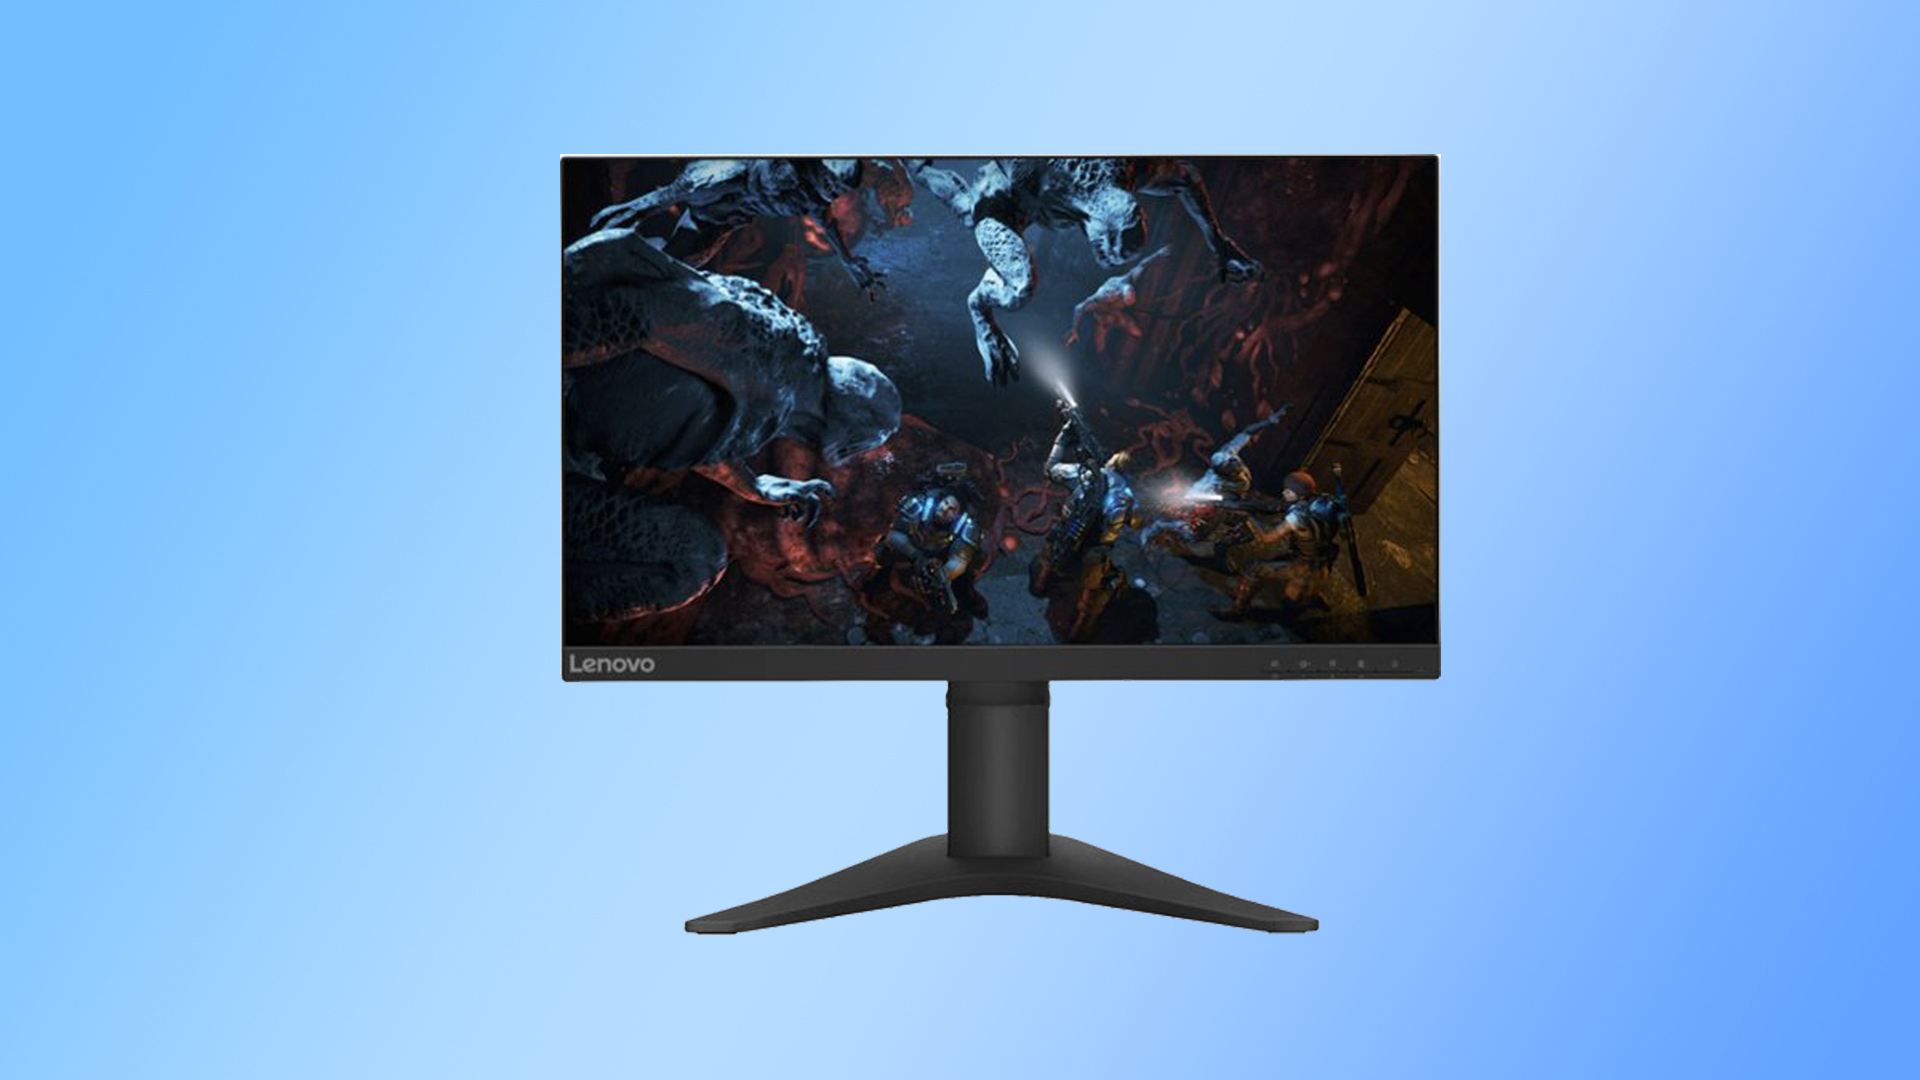 Lenovo G25-10 Gaming Monitor Review: 144 Hz on a Budget